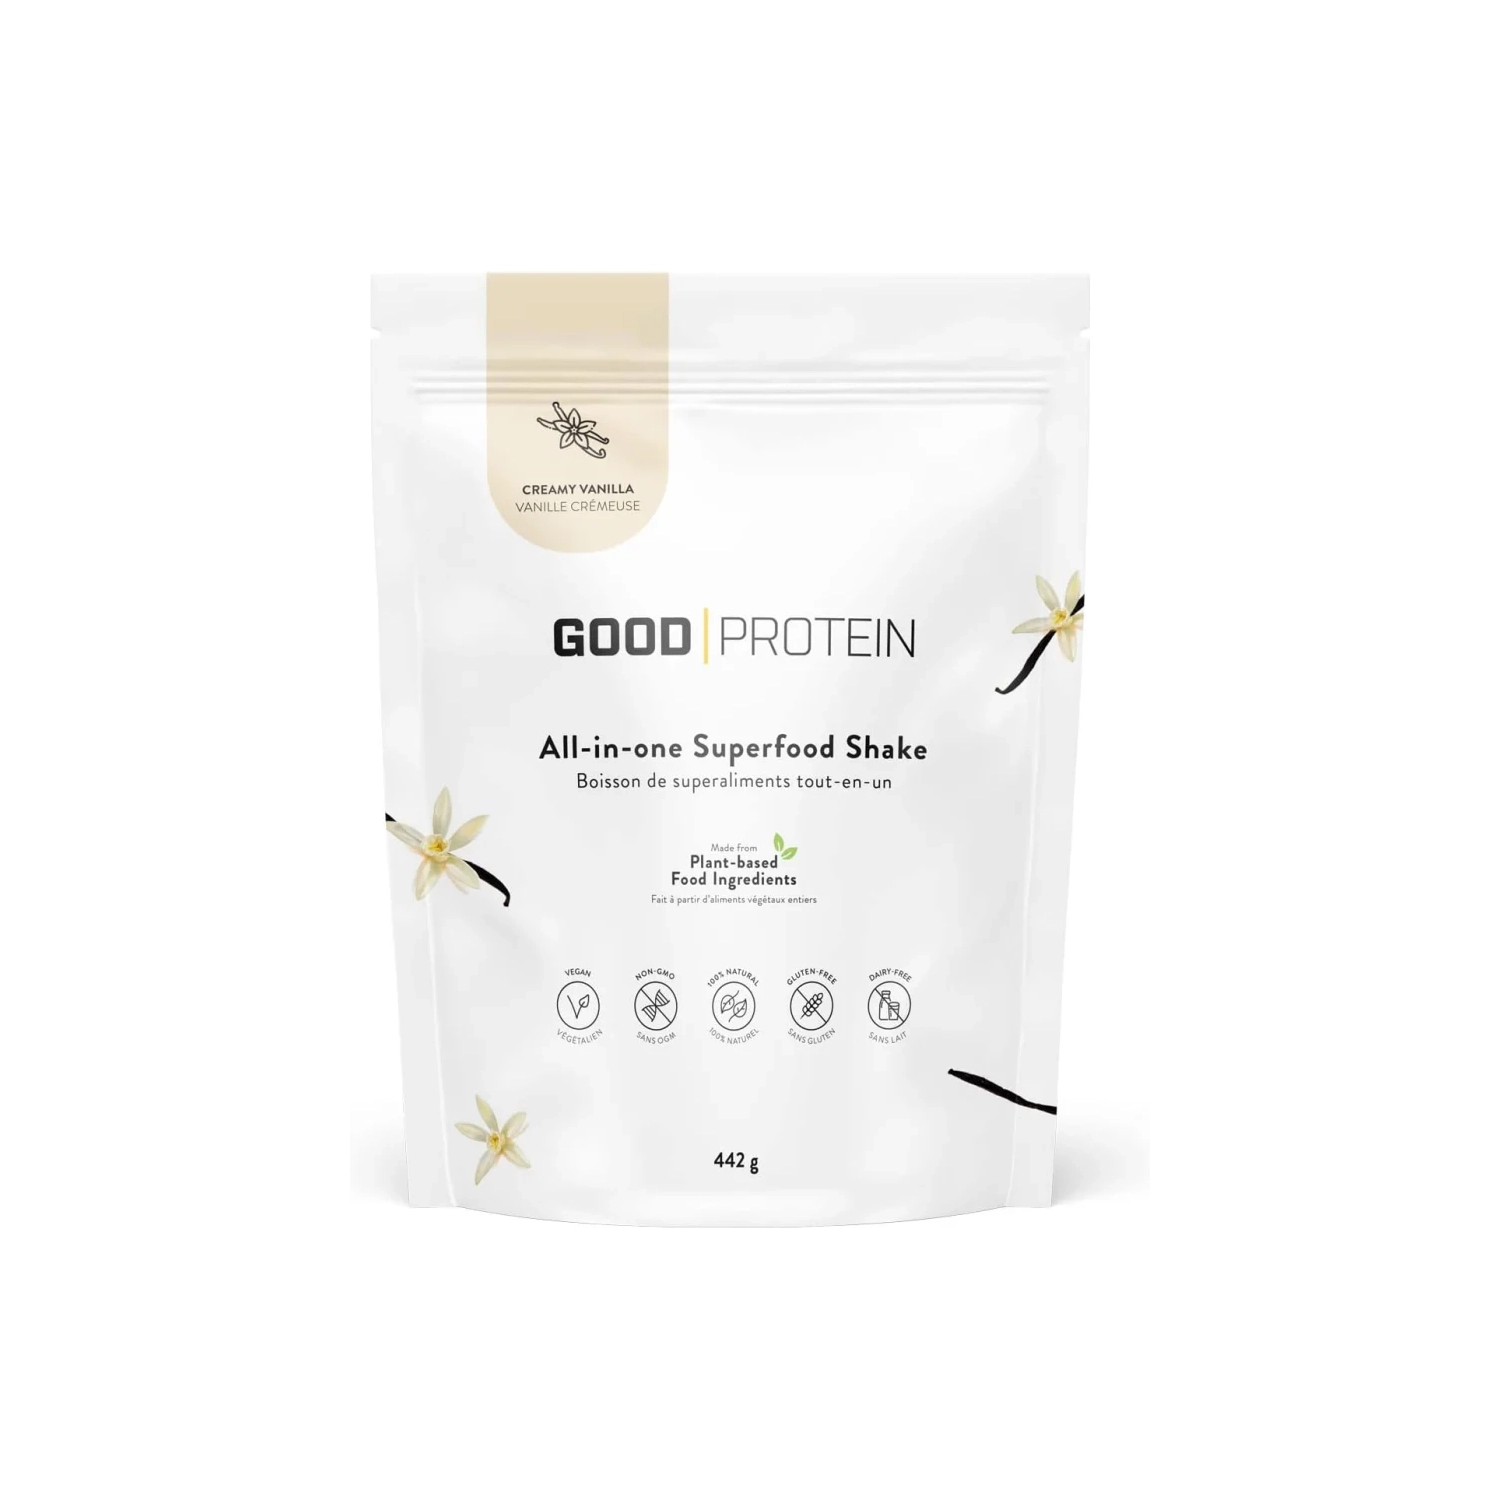 Good Protein Vegan Plant-based Protein Powder - Creamy Vanilla, 442g - 100% Natural, Non-GMO, Dairy-free, Gluten-free, Soy-free, No Added Sugar - All-in-one Superfood Shake